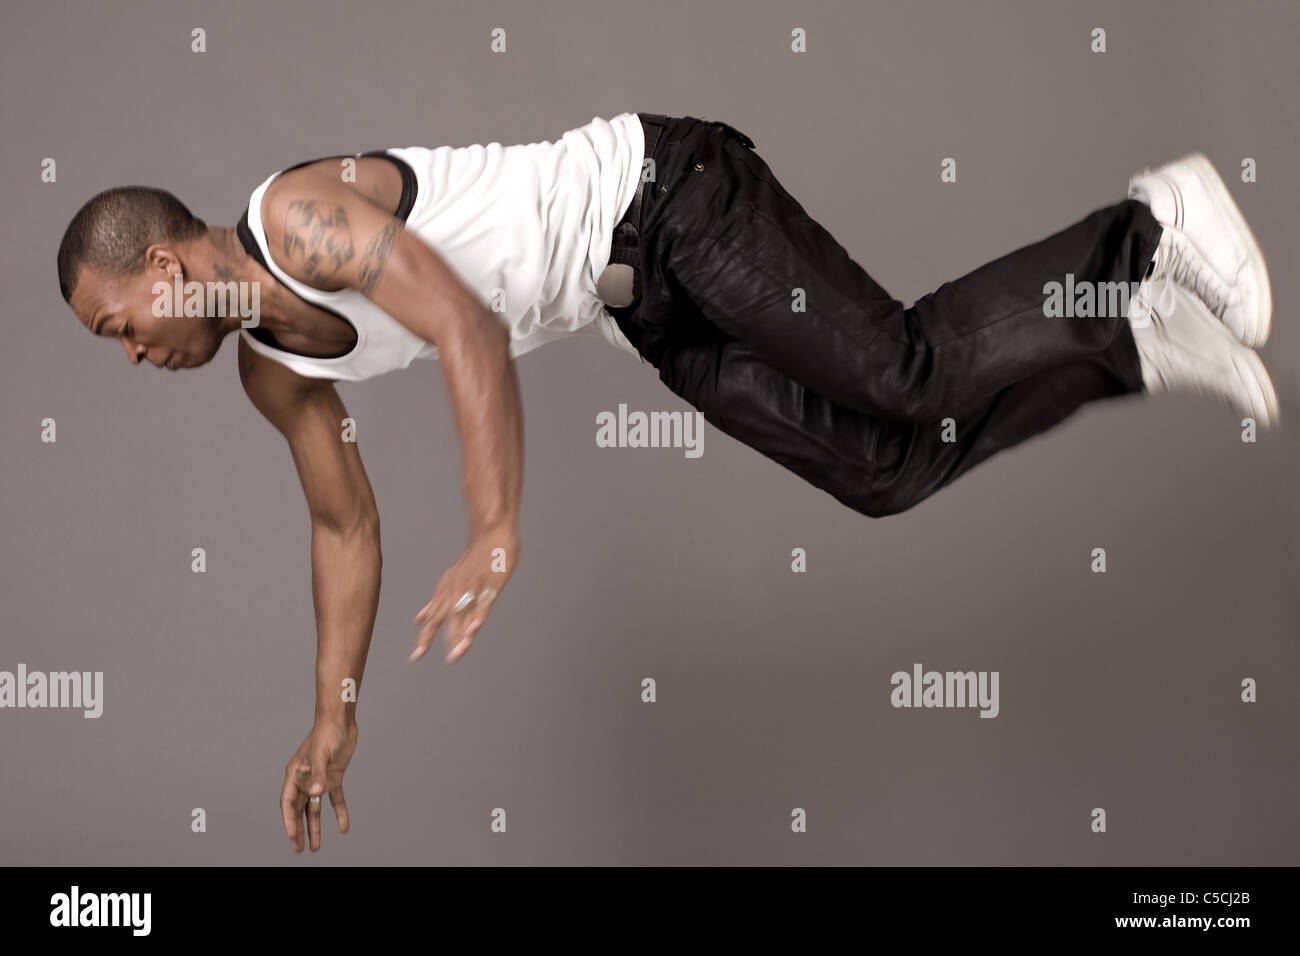 Dancer jumping to the floor on grey background Stock Photo